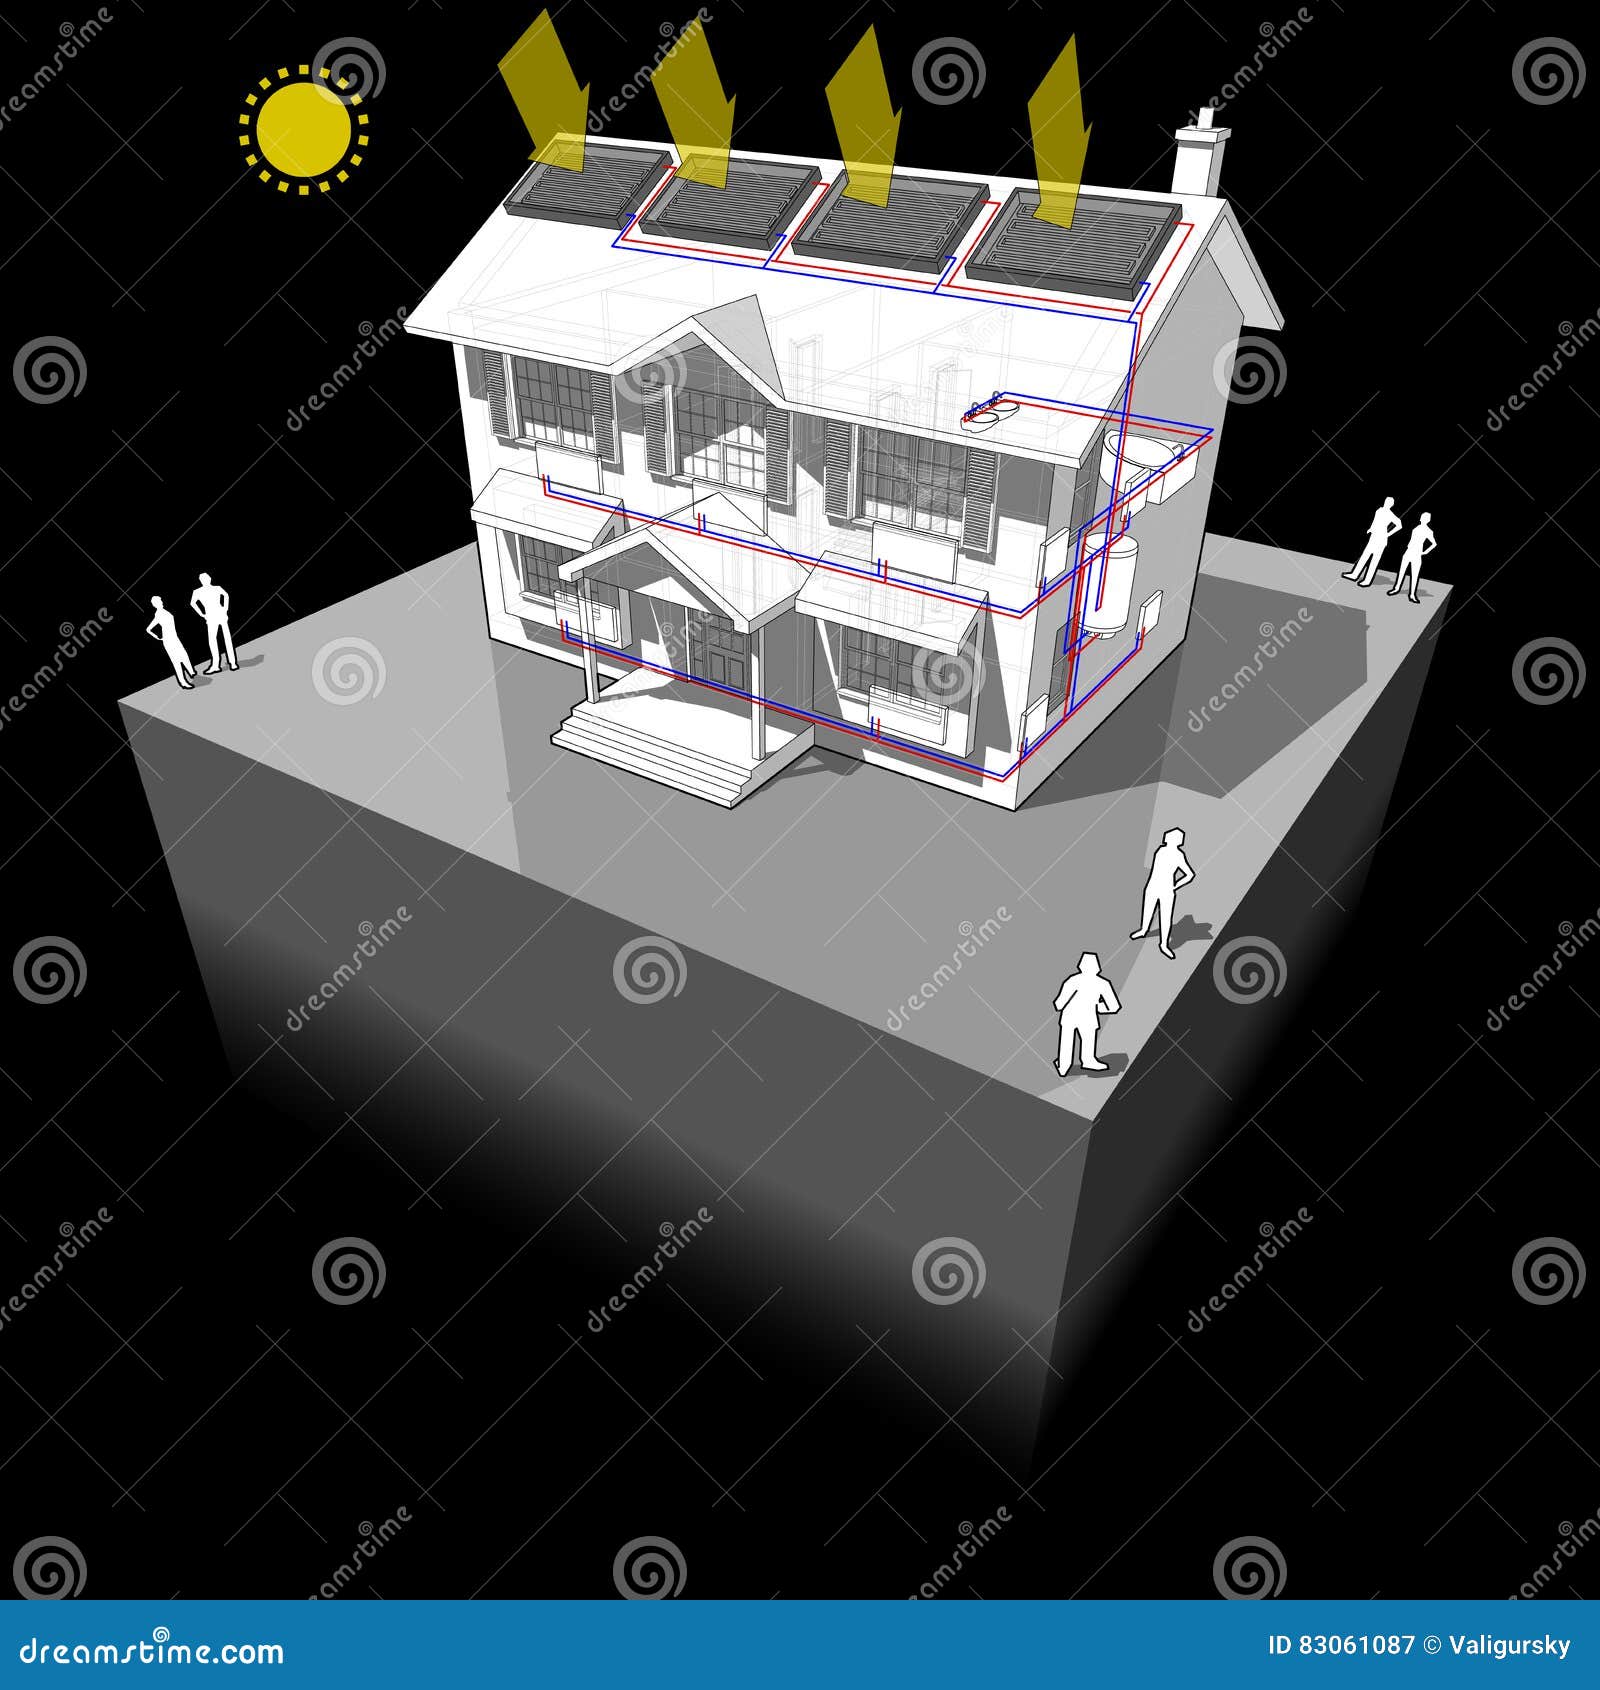 solar water heaters and radiators house diagram